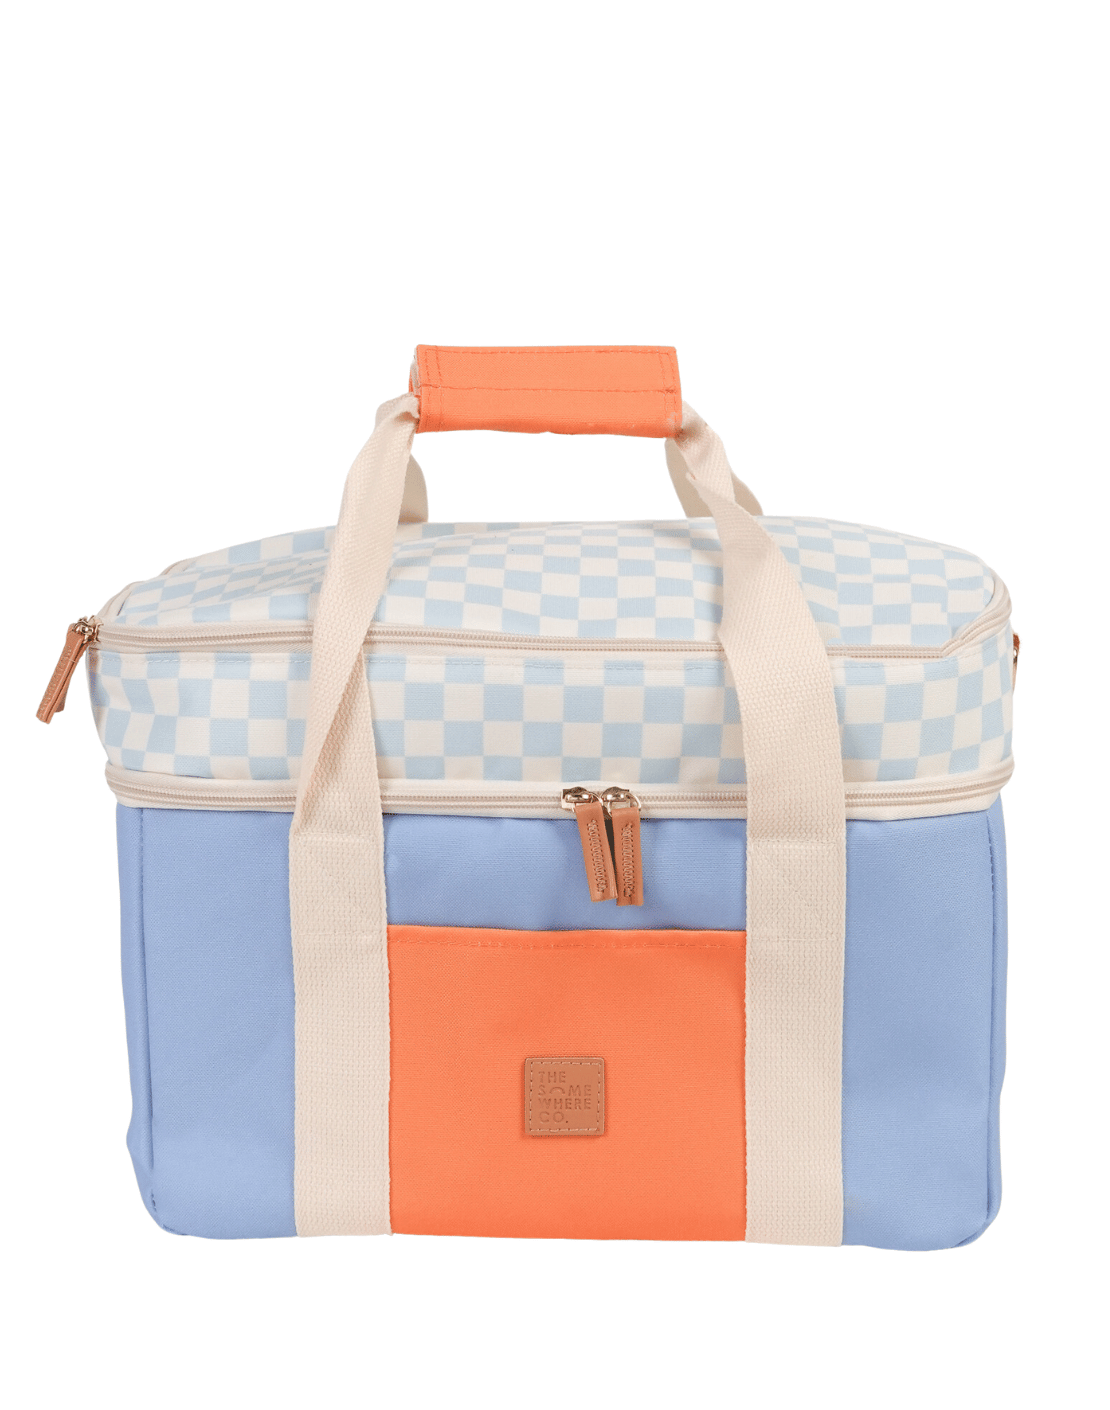 The Somewhere Co Sorrento Carry All Cooler Bag